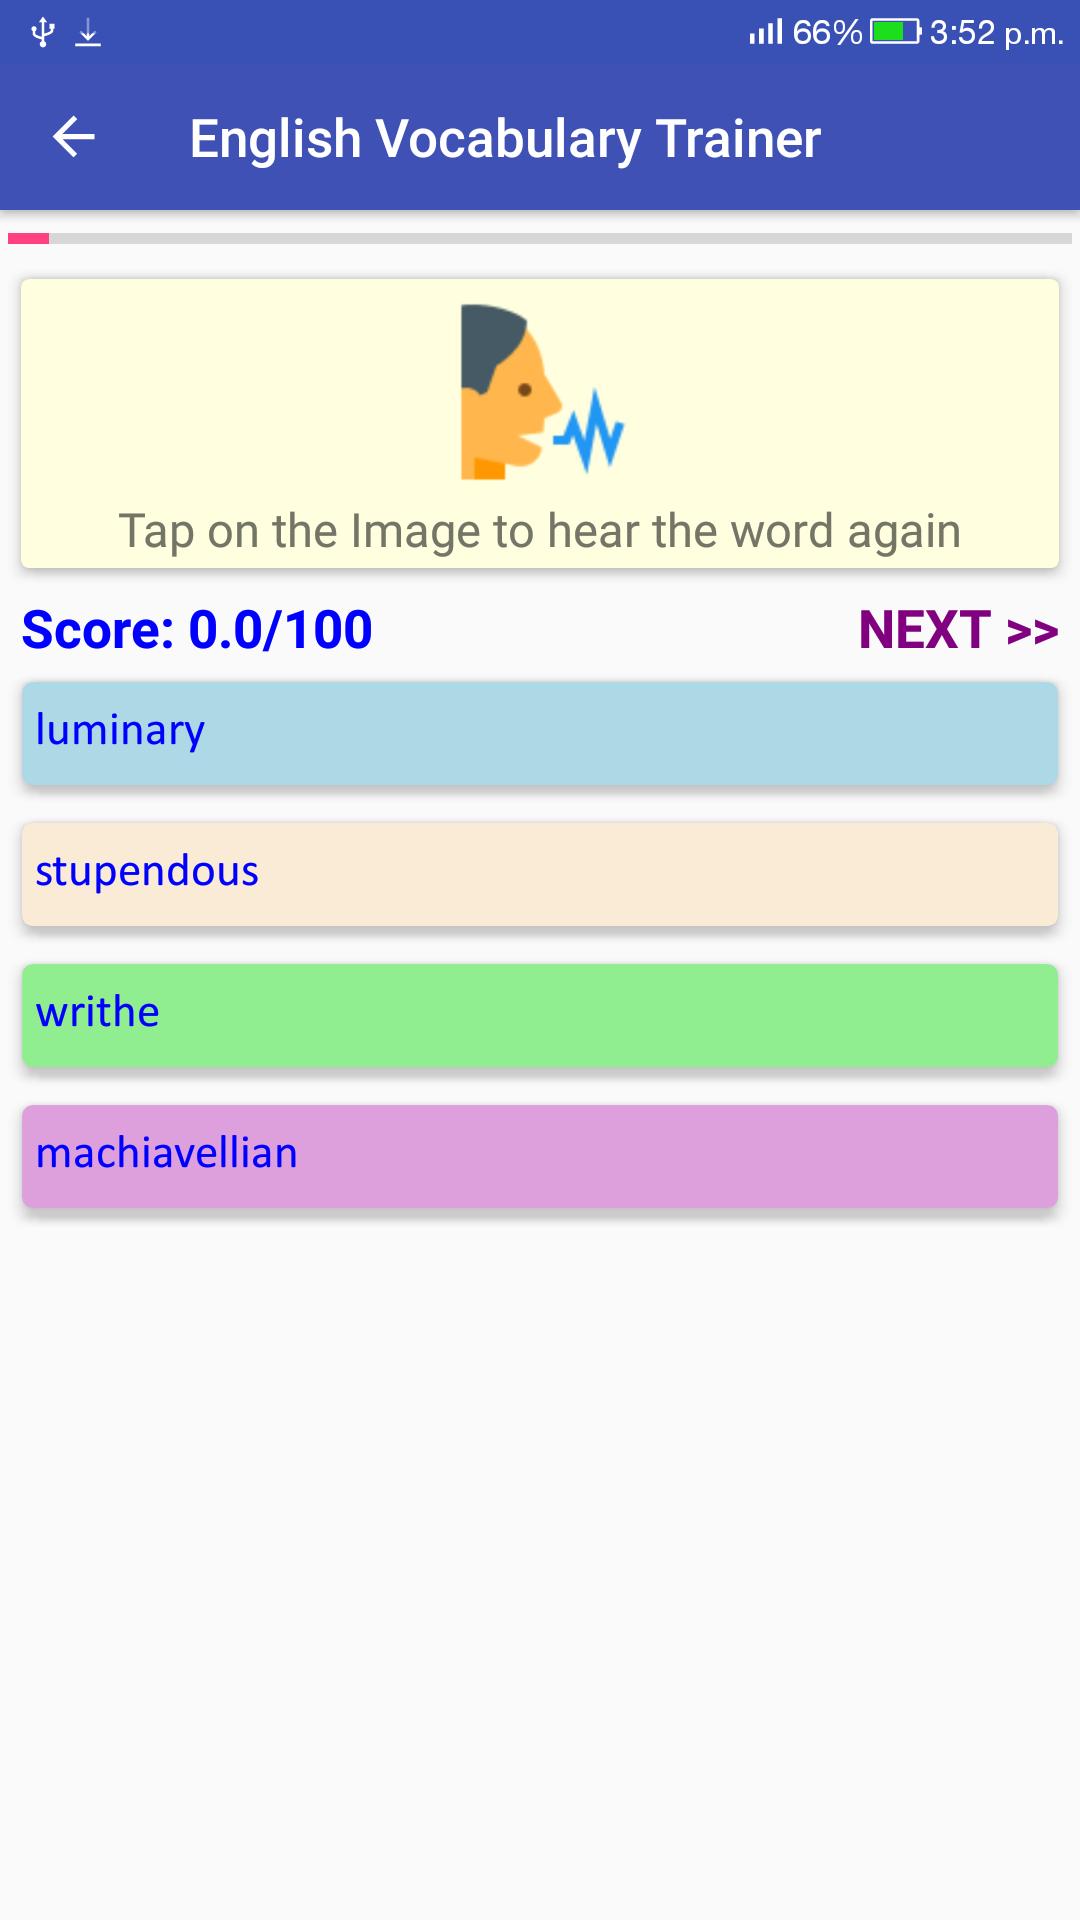 English Vocabulary Trainer for Android - APK Download